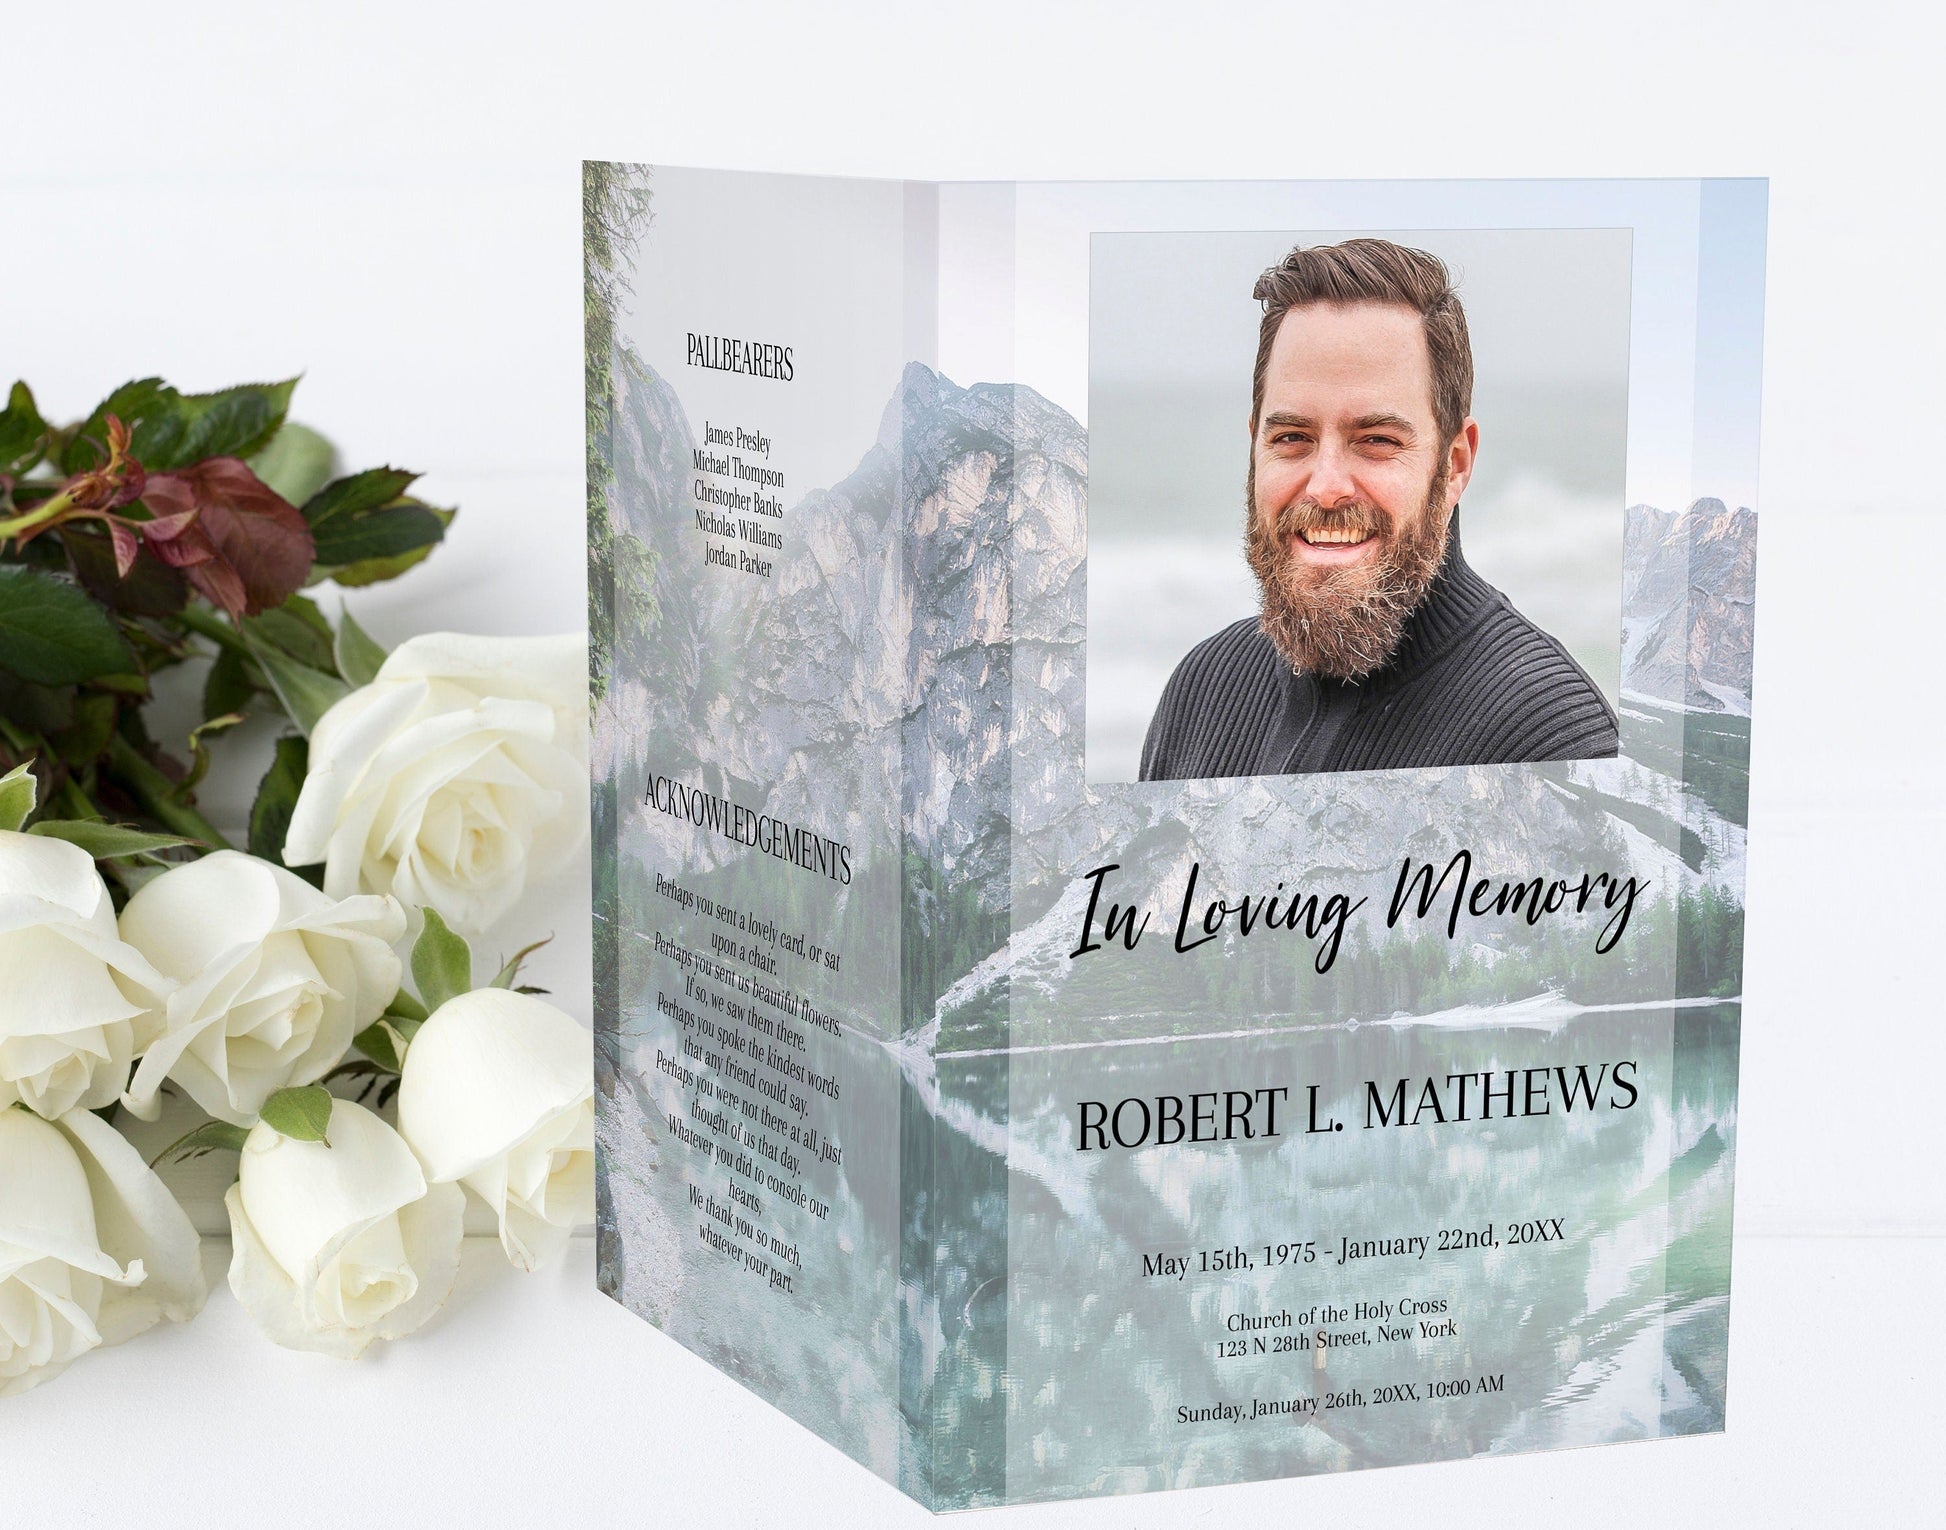 funeral program front and back page standing upright with flowers beside